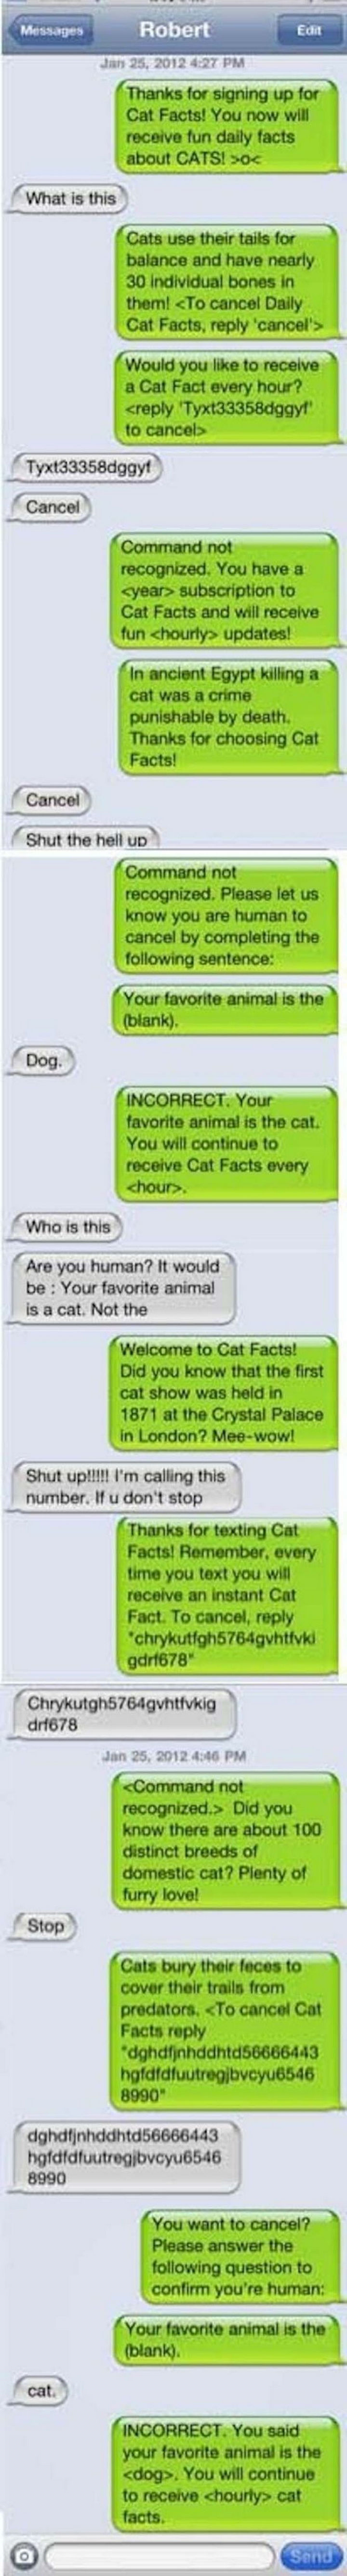 16 Funny Wrong Number Texts - Annoying cat facts!